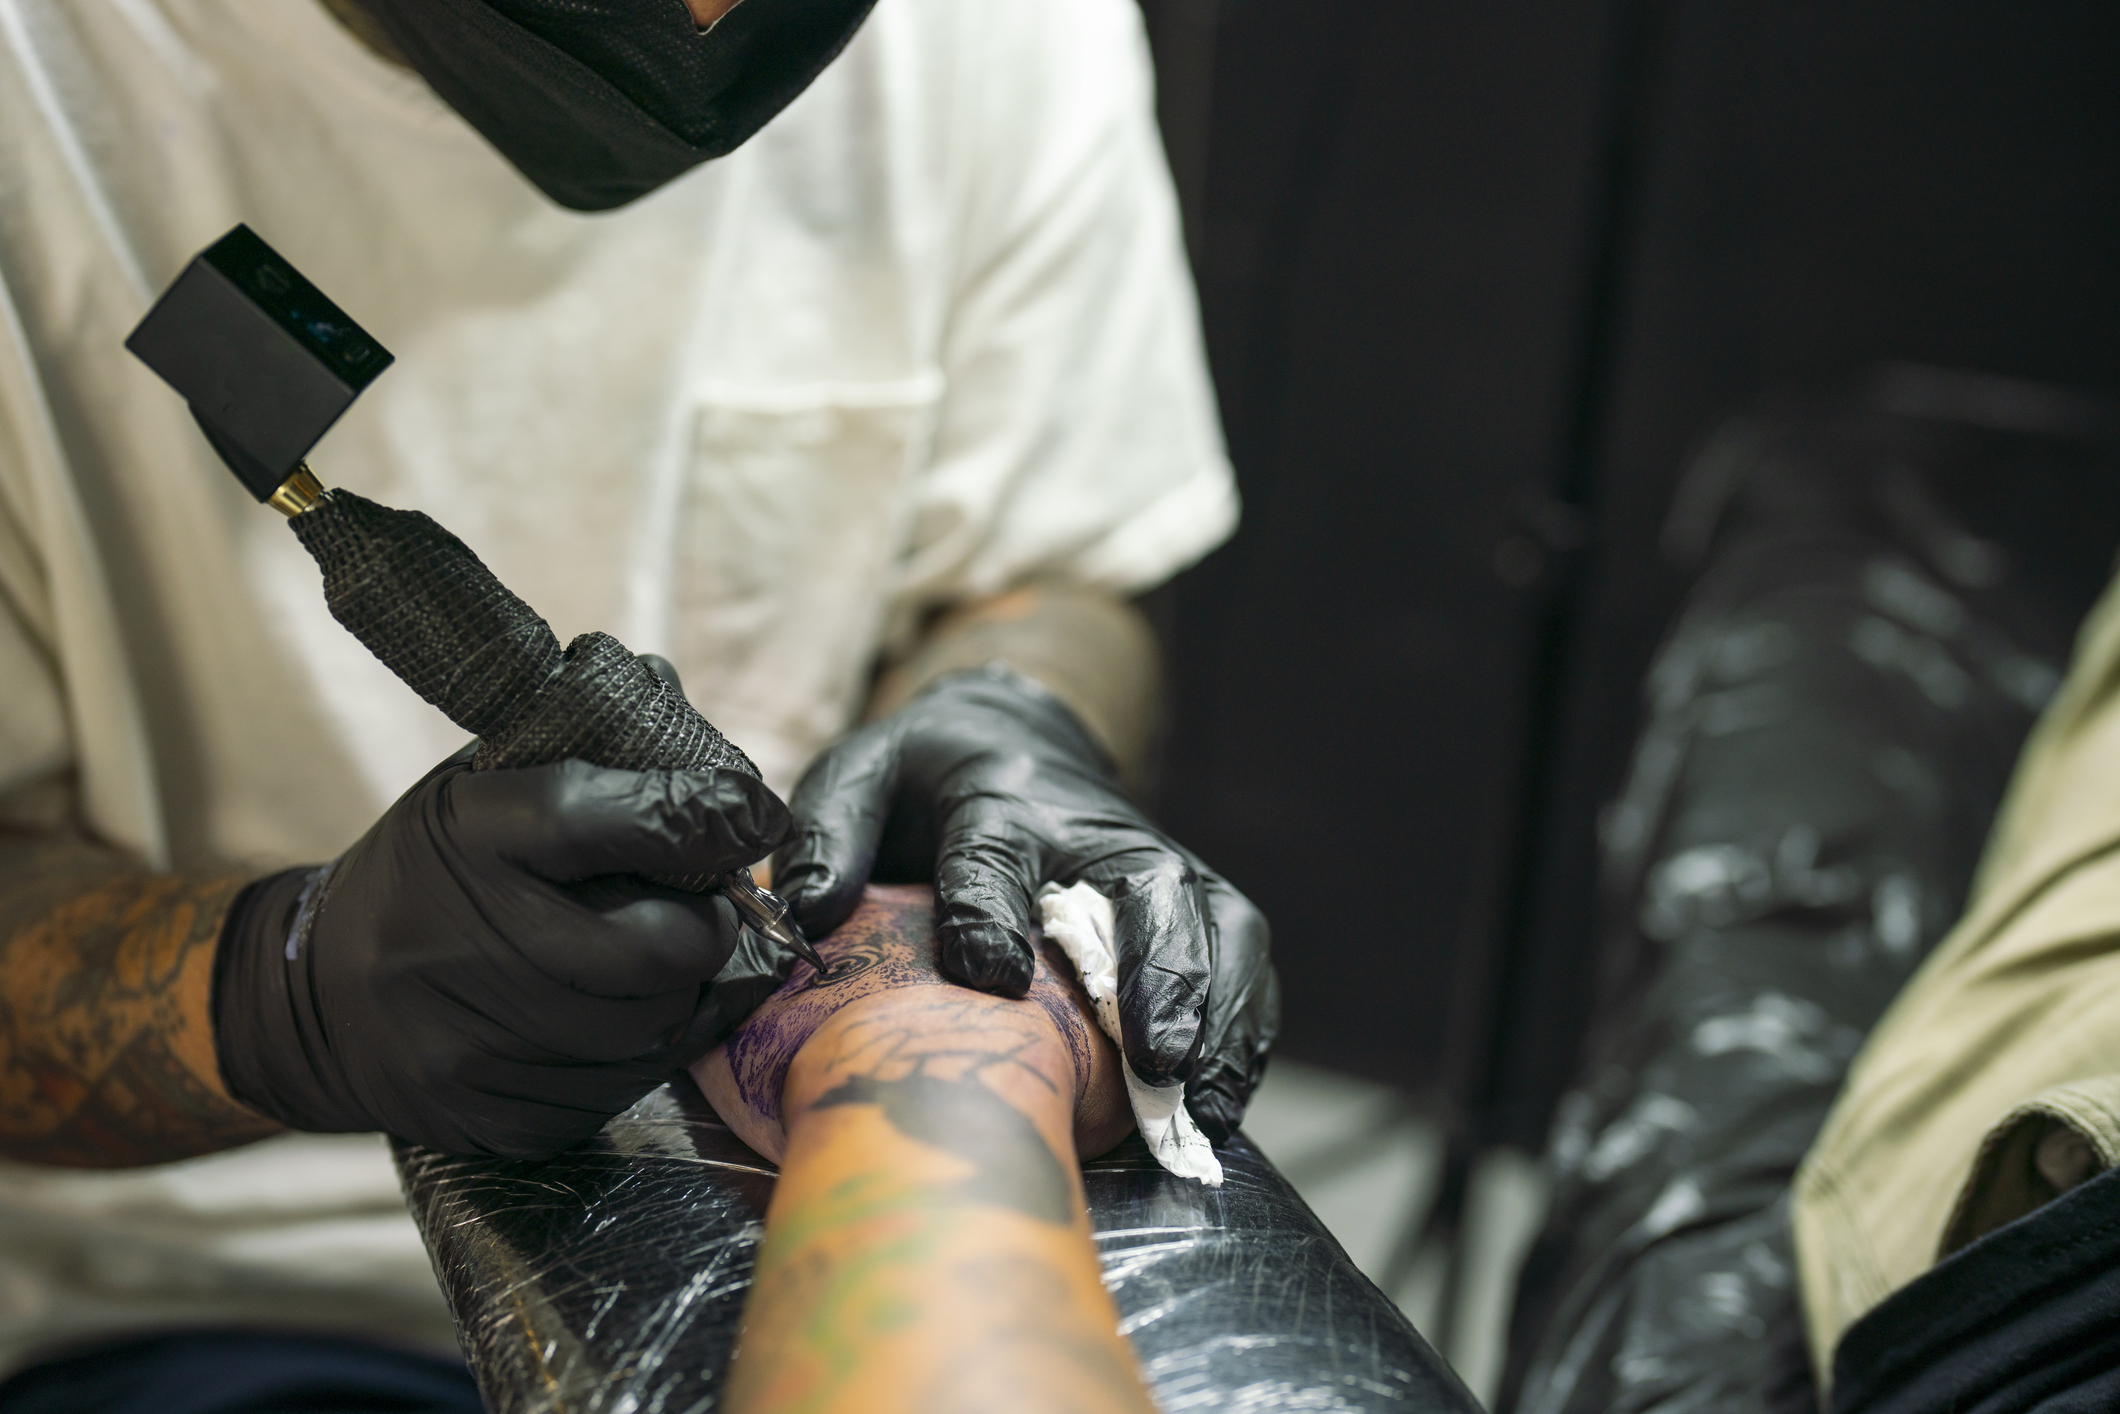 This Black-Owned Tattoo Shop, Axe Of Kindness, Donates A Portion Of Its Proceeds To Nonprofits